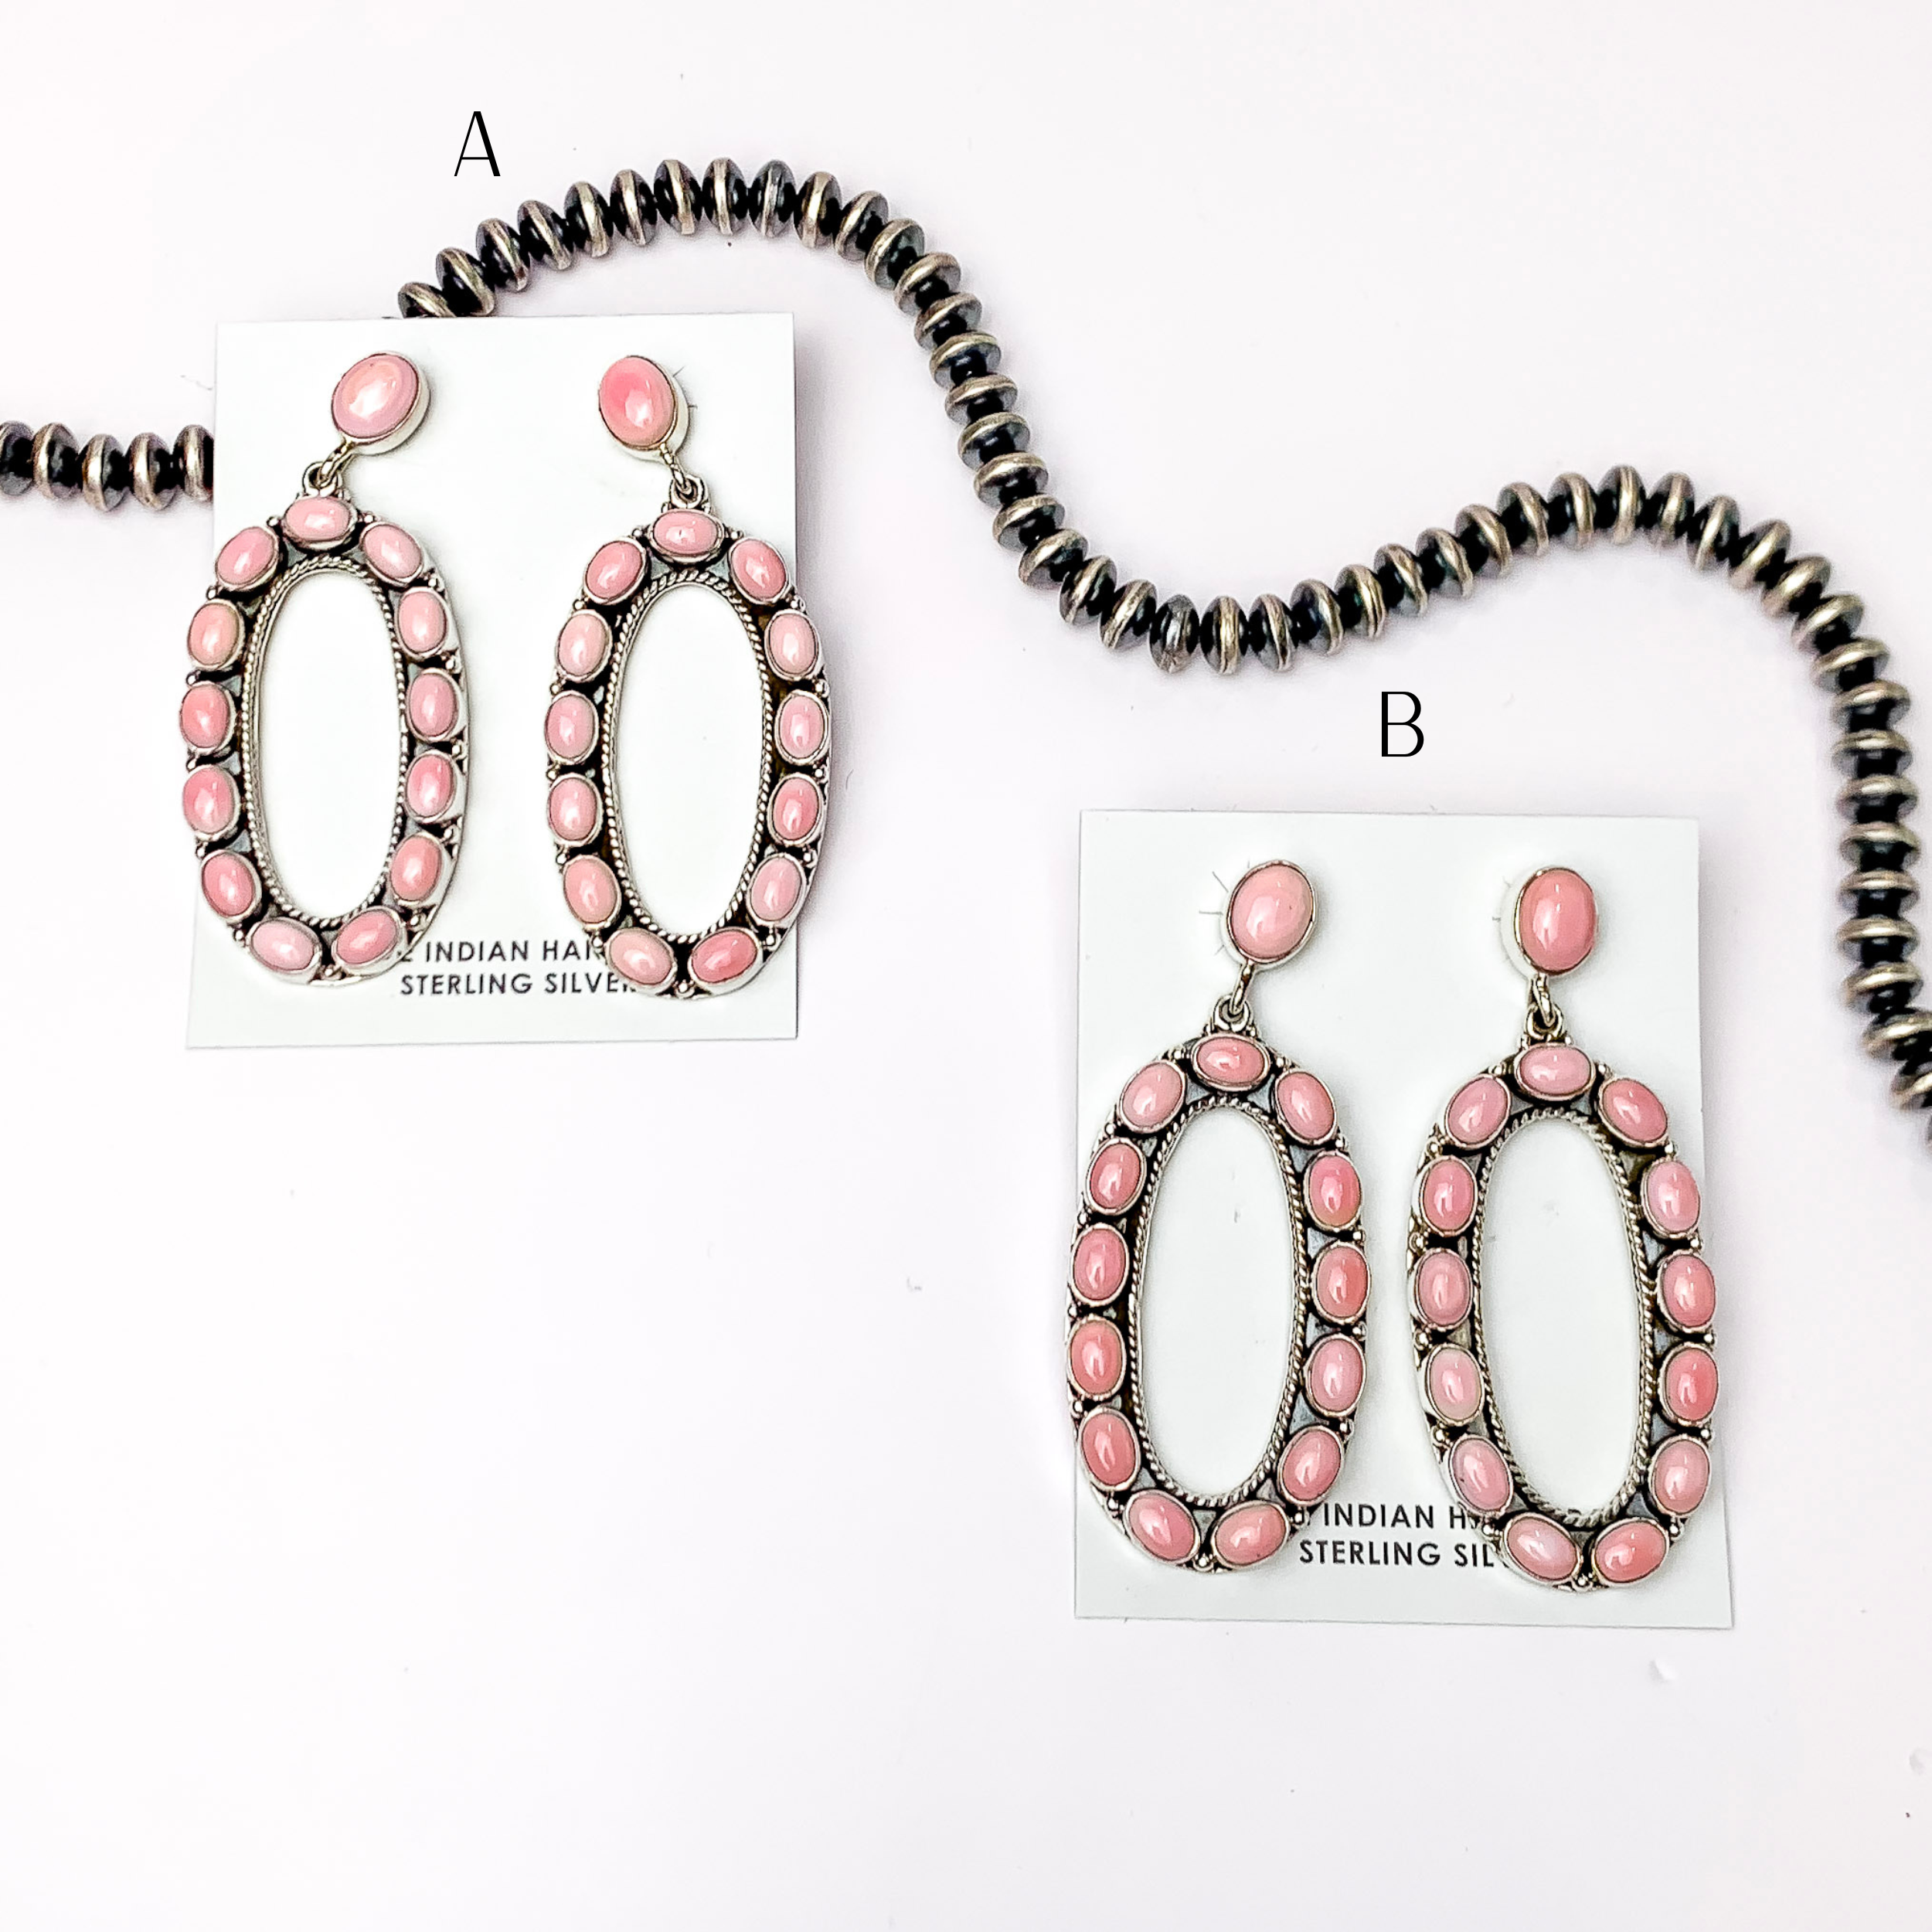 Navajo | Navajo Handmade Sterling Silver Oval Drop Earrings with Pink Conch Stones - Giddy Up Glamour Boutique